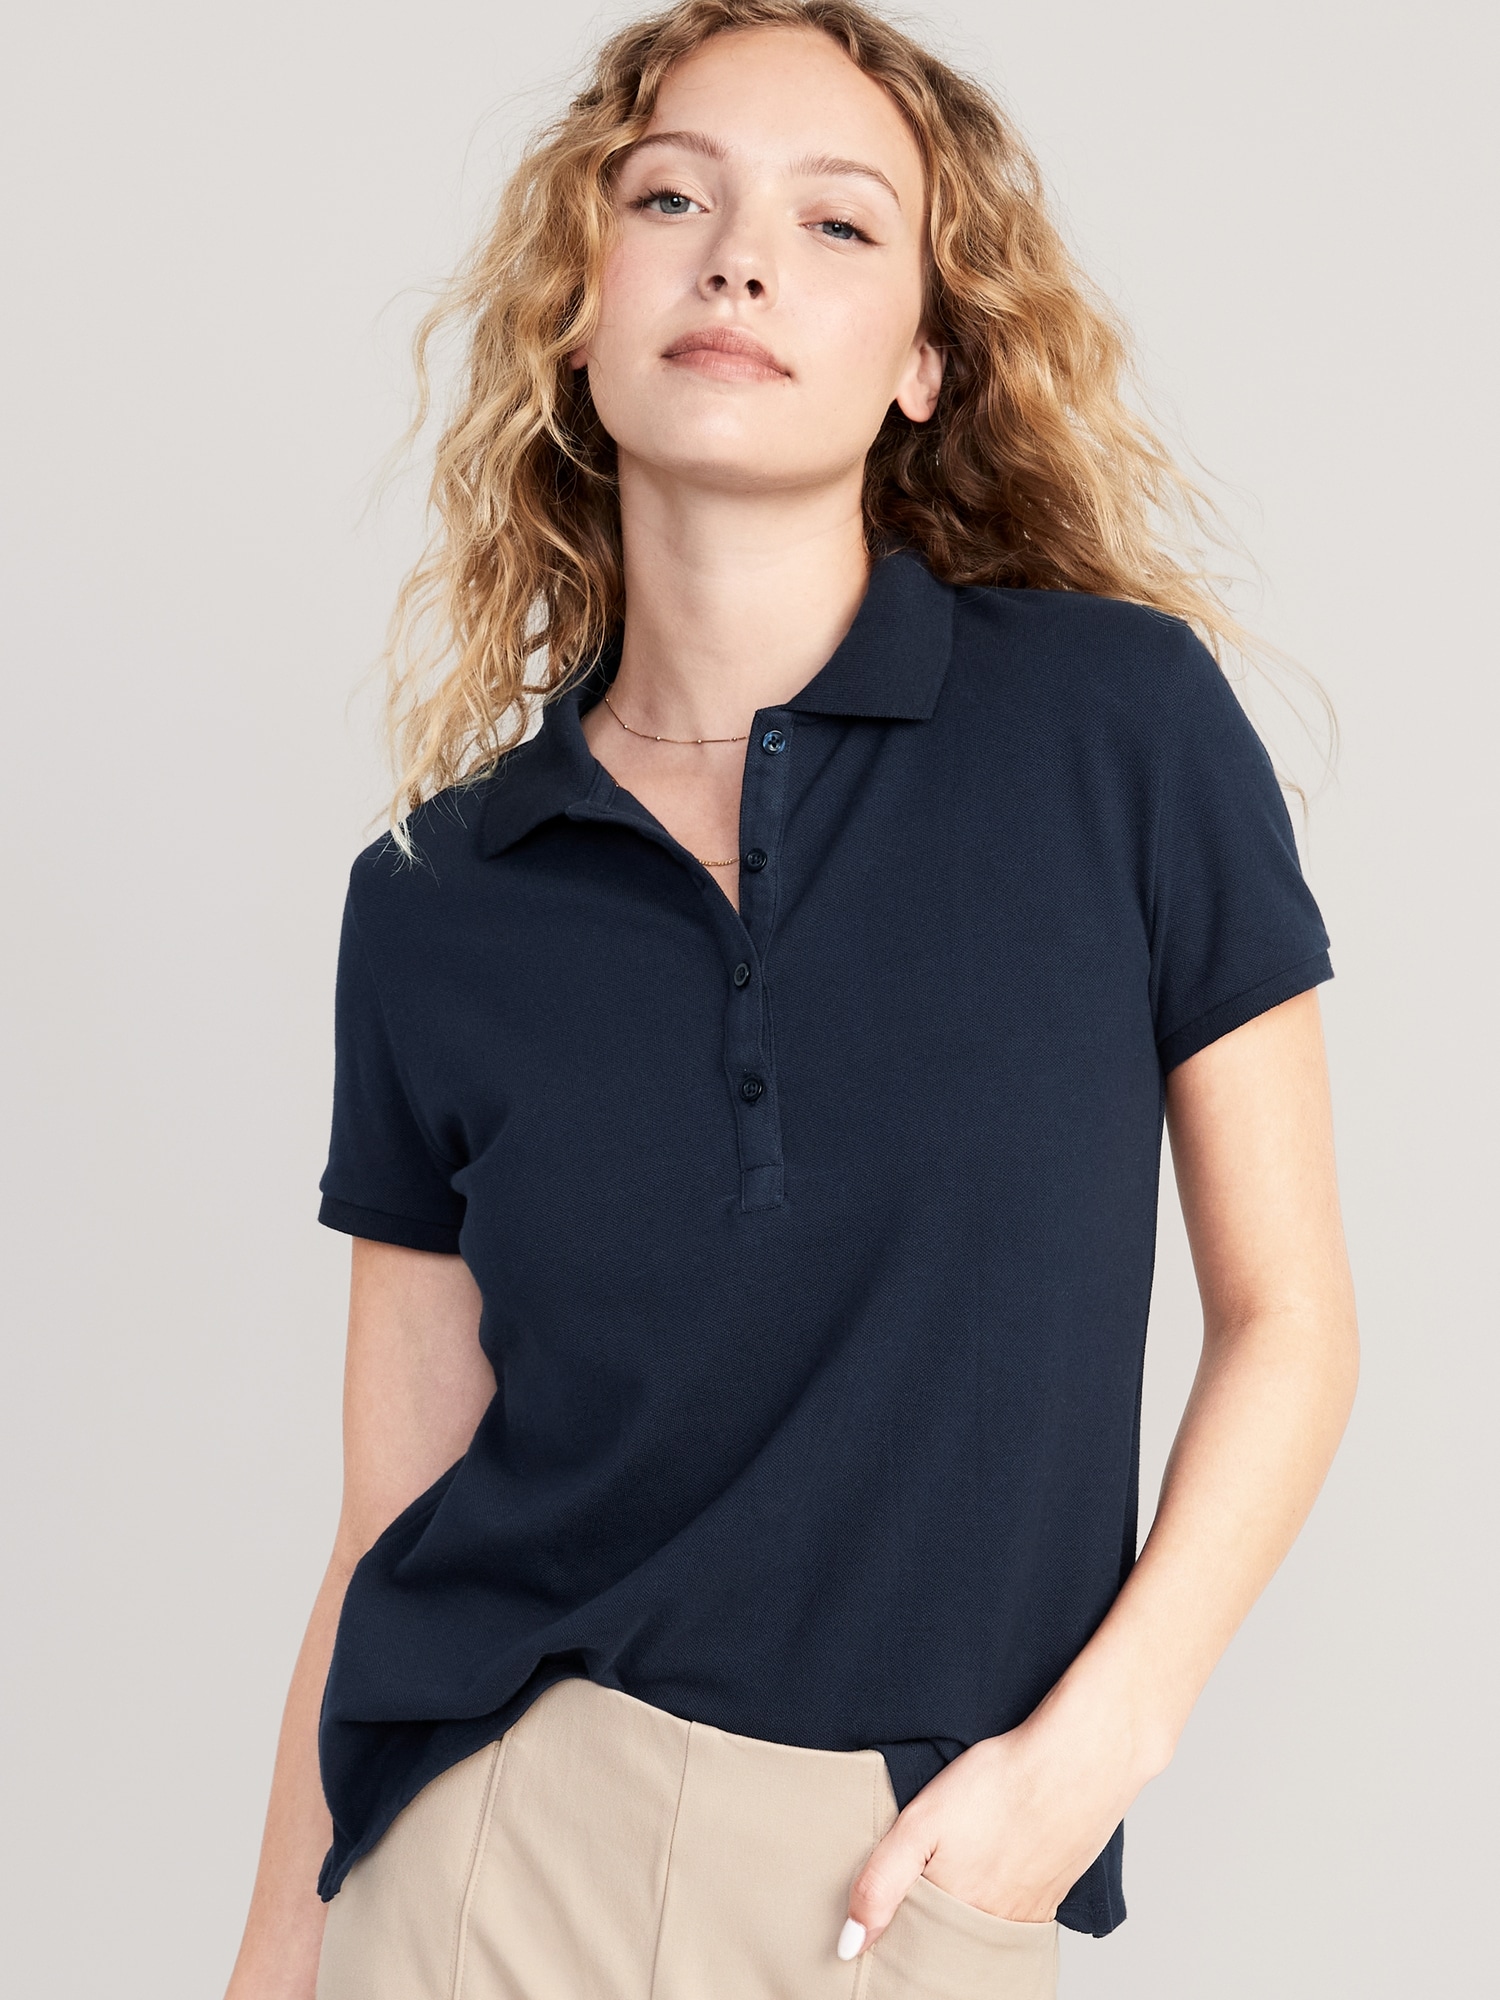 Women's Athletic Polo Shirts | Old Navy